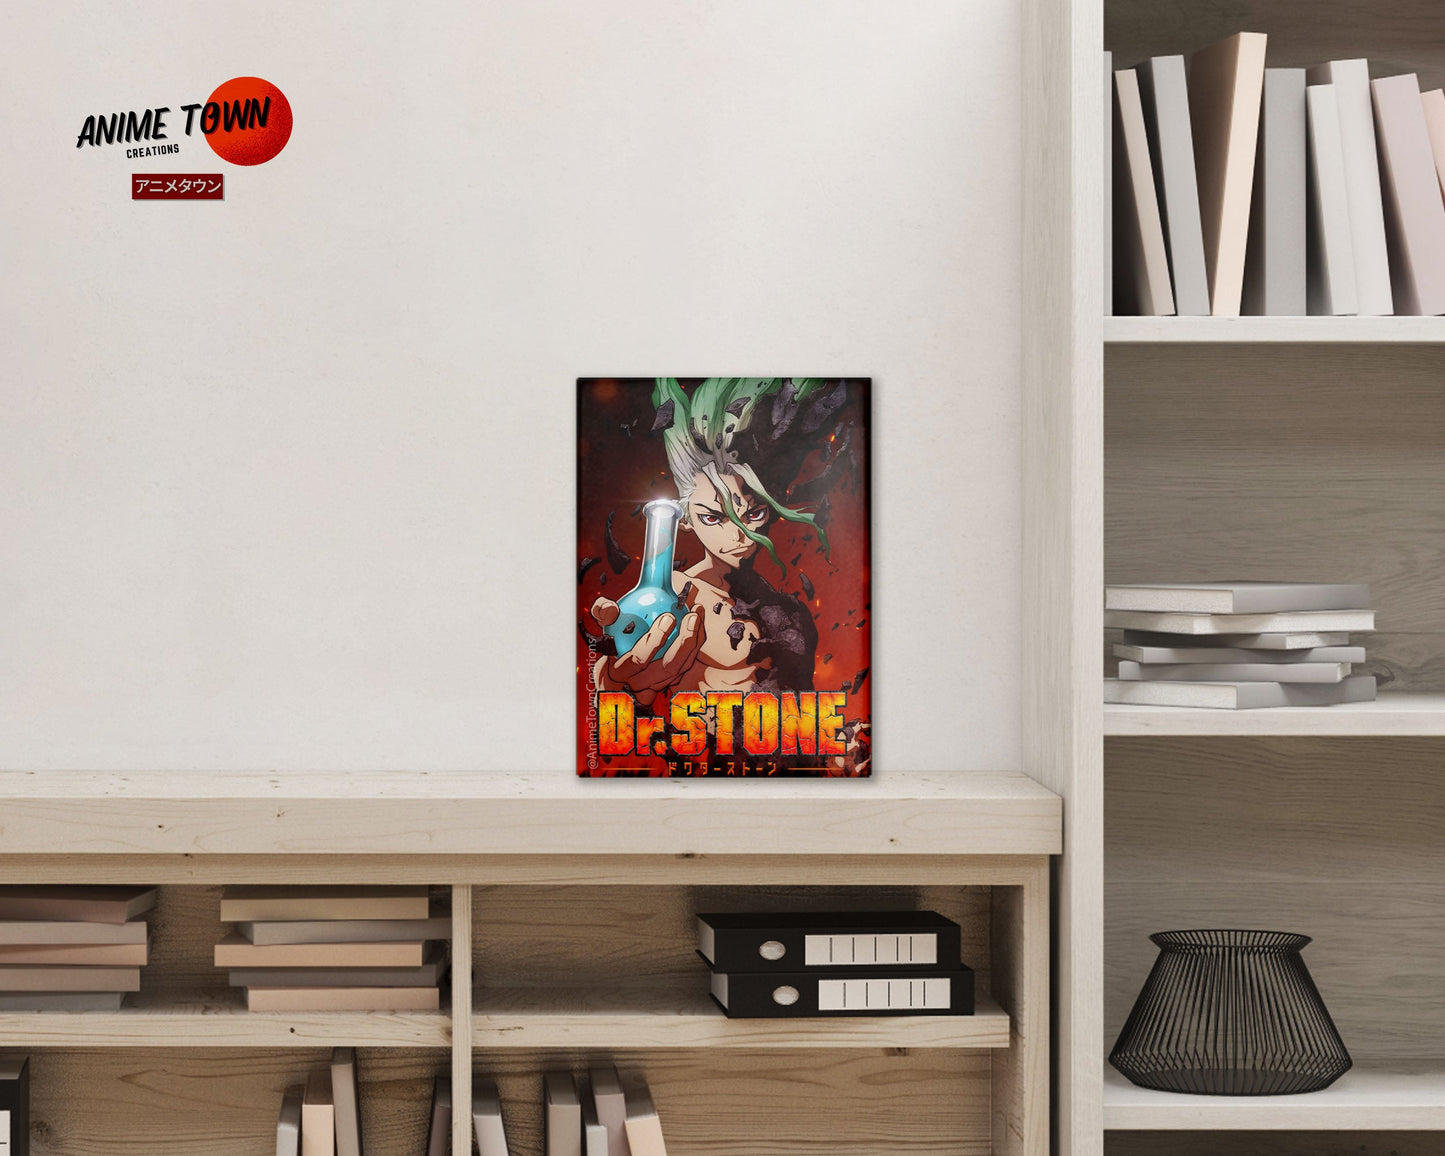 Anime Town Creations Metal Poster Dr Stone 24" x 36" Home Goods - Anime Dr Stone Metal Poster